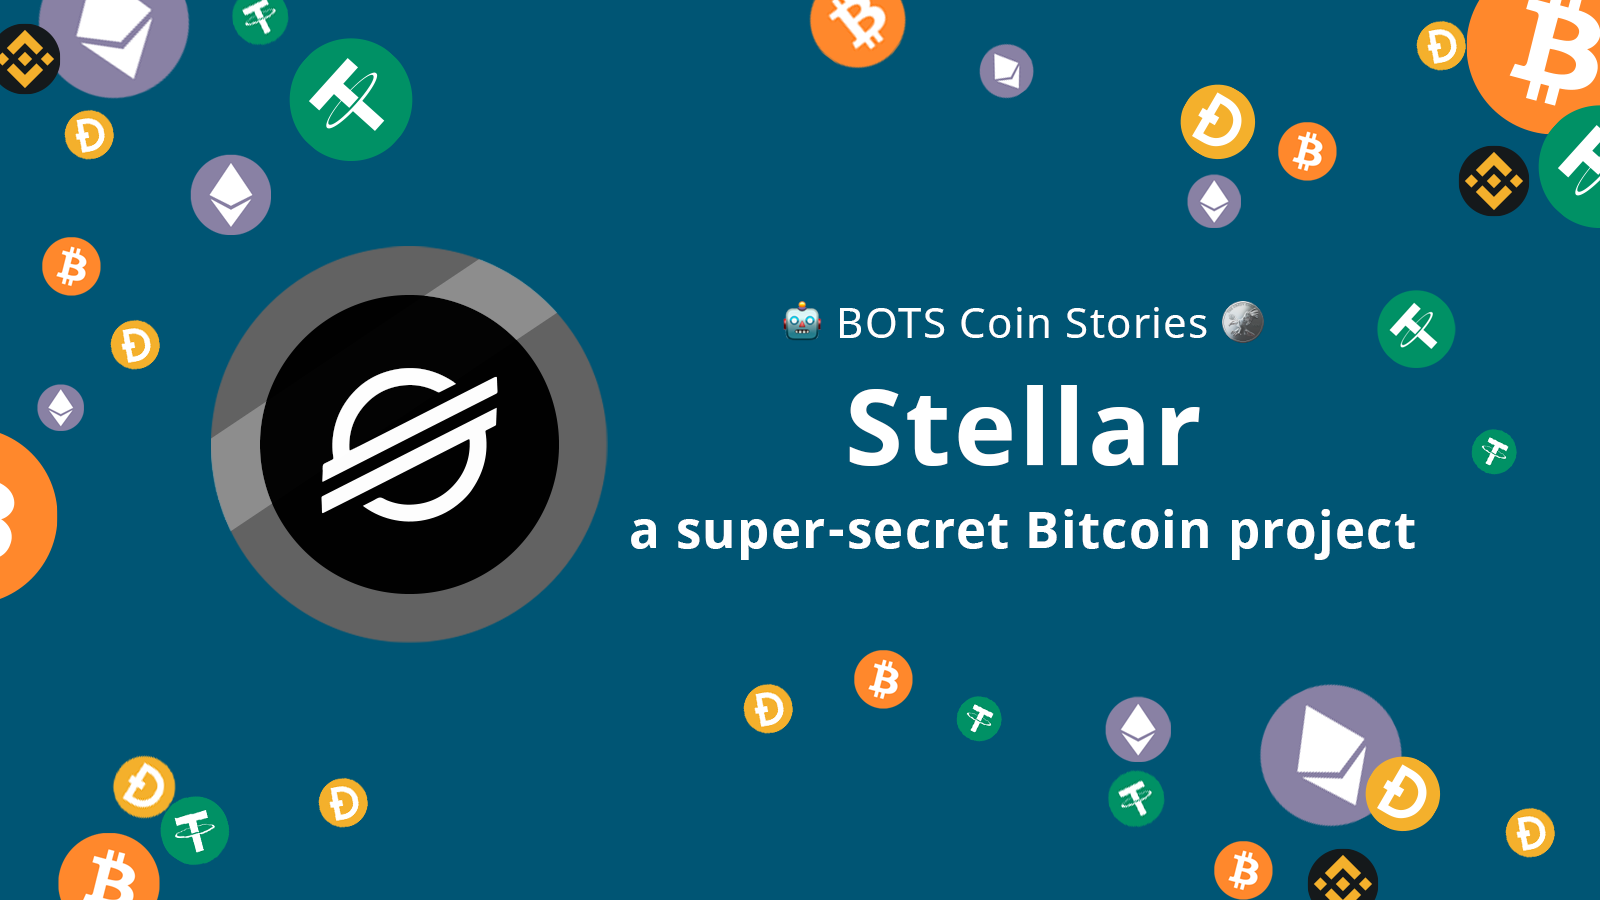 How to Buy Stellar (XLM) Step-by-Step Guide - Pionex